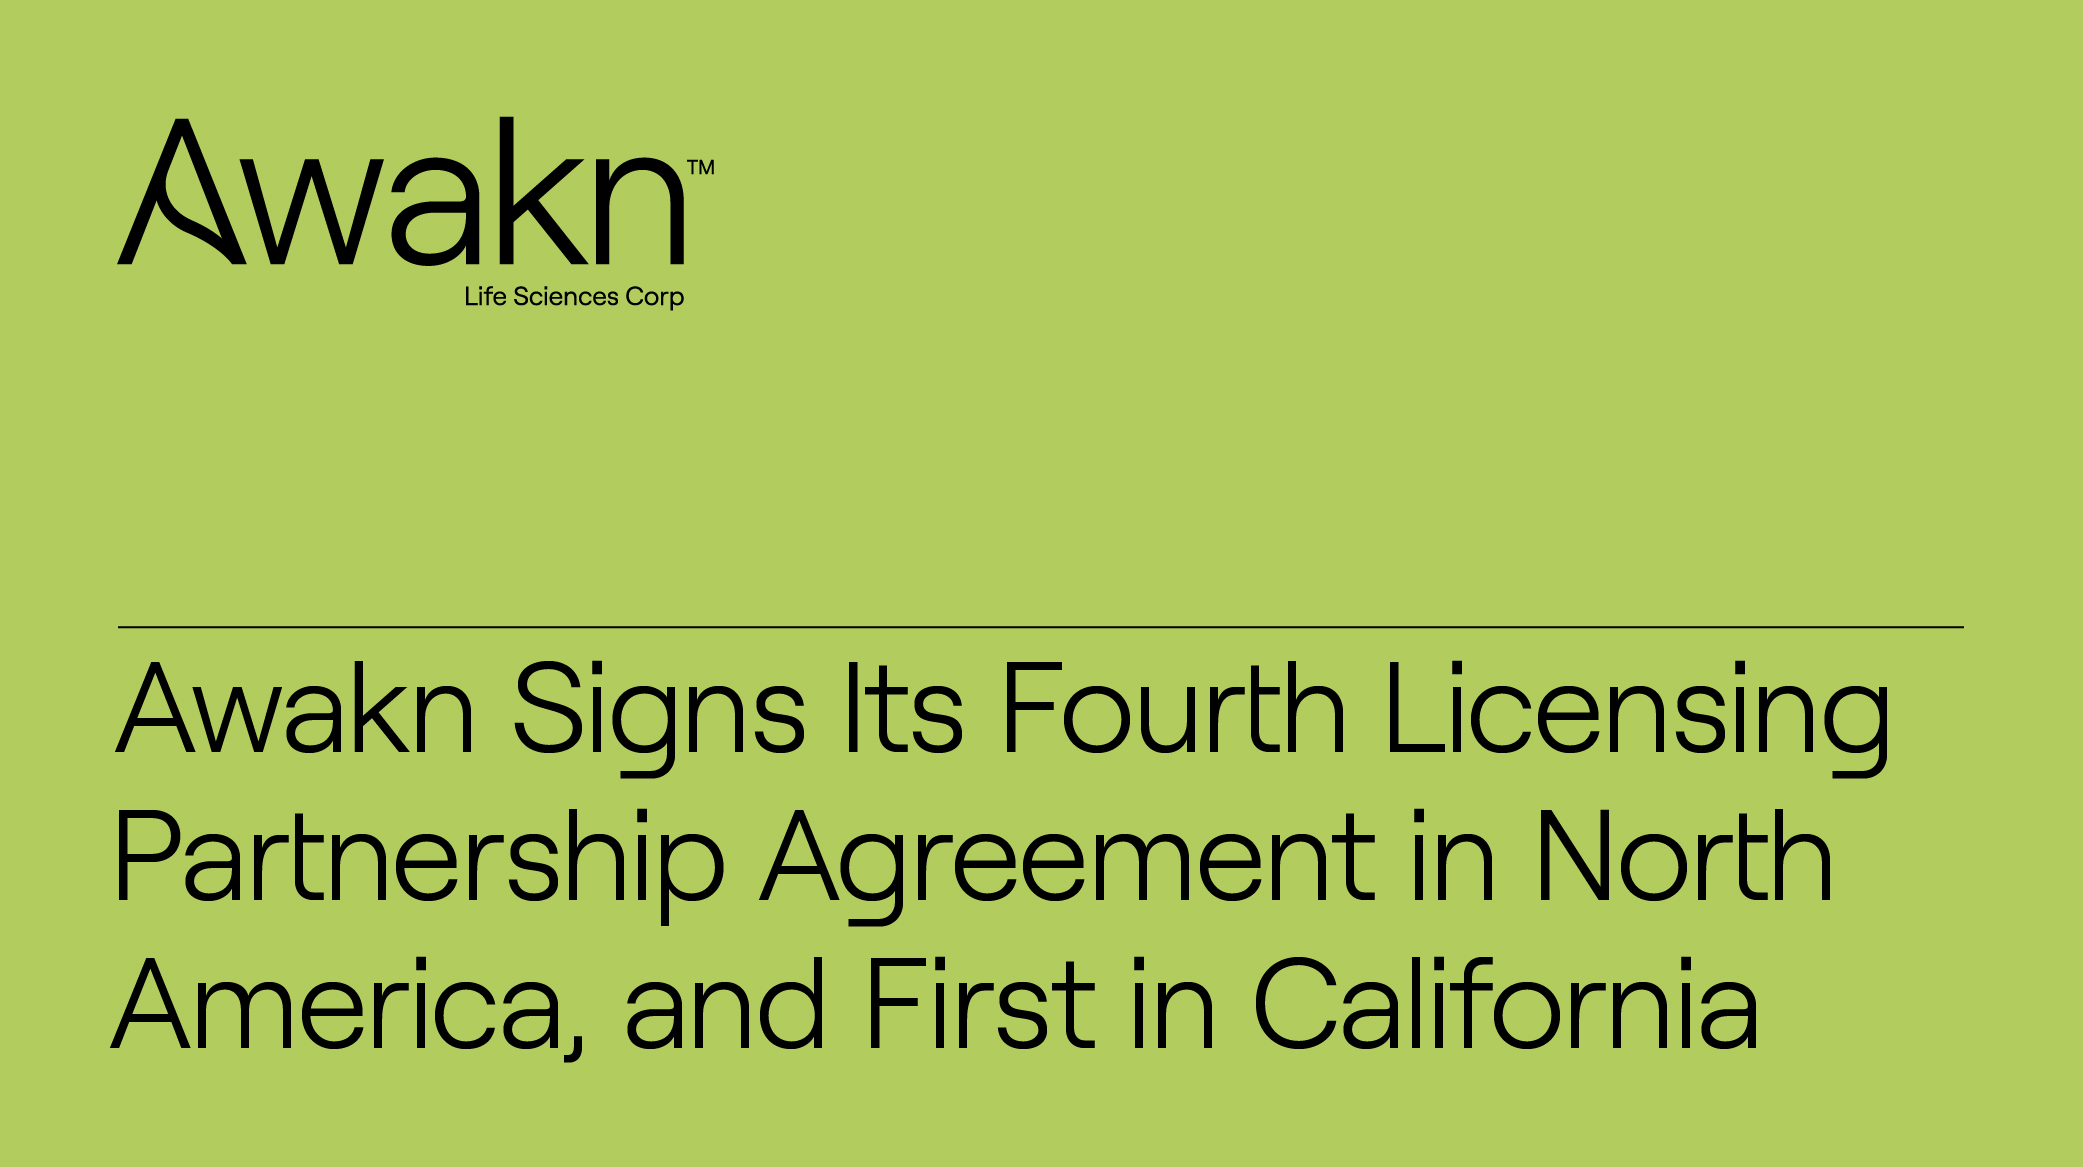 Awakn Life Sciences Signs its Fourth Licensing Partnership Agreement In North America, And First In California